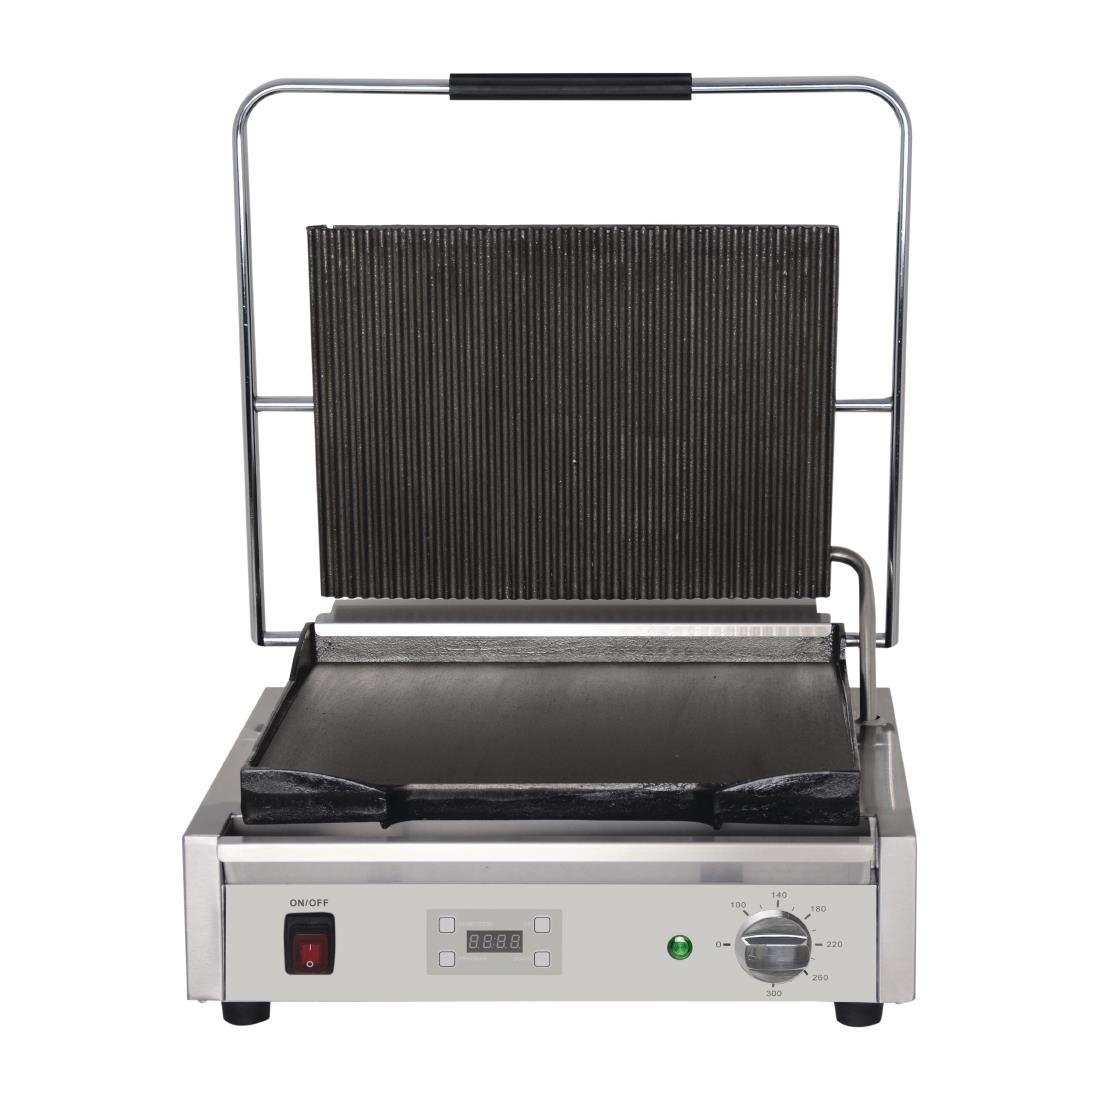 Contactgrill Groot | Groef/Glad | 2200W | 480x435x(H)215mm